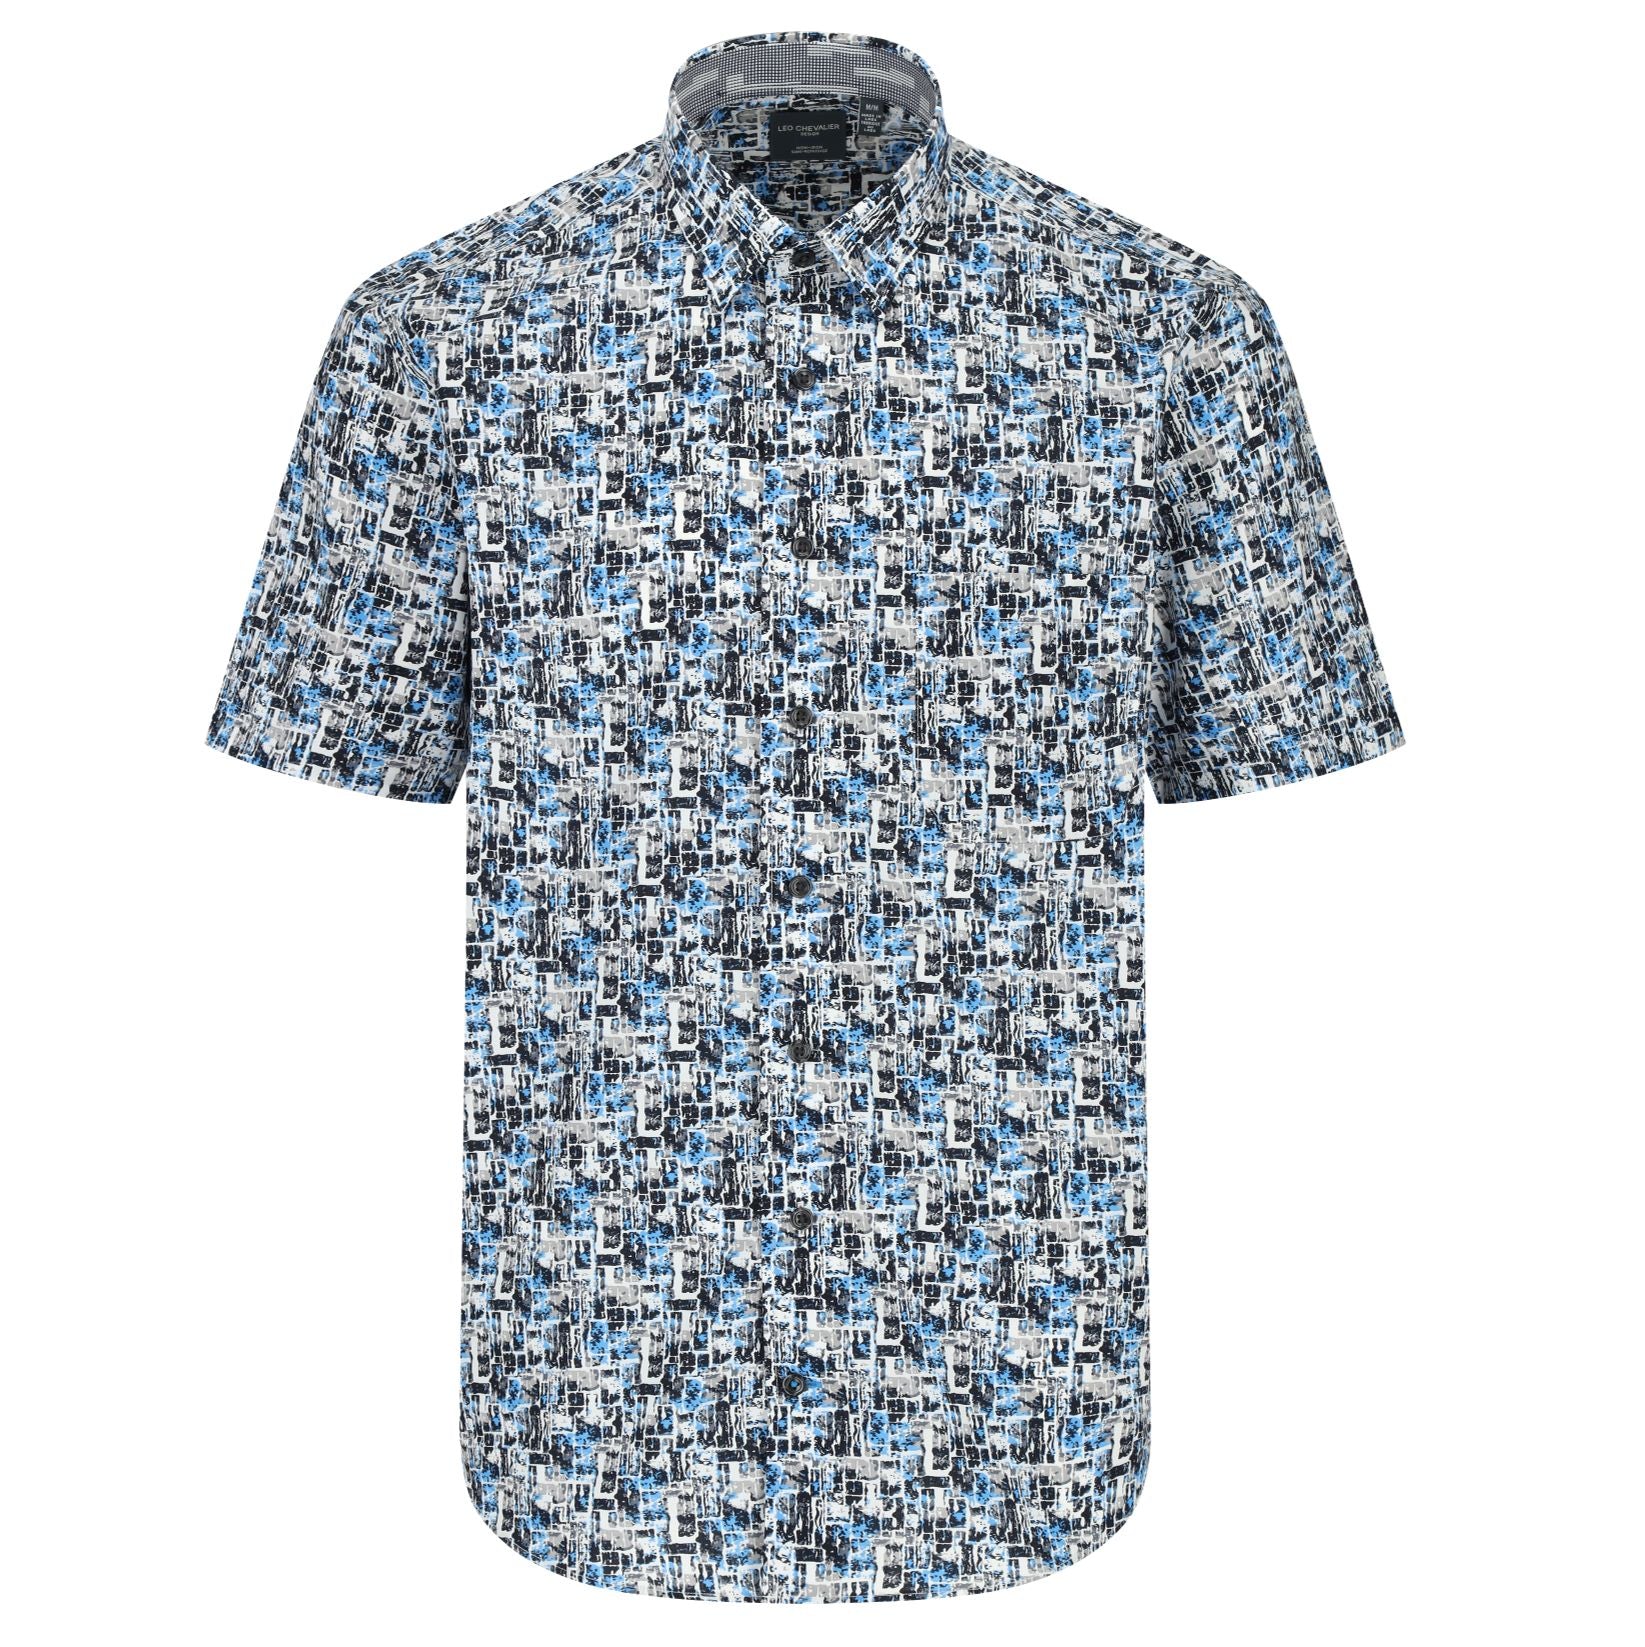 Black, Blue, and Grey Abstract Print Short Sleeve No-Iron Cotton Sport Shirt with Hidden Button Down Collar by Leo Chevalier